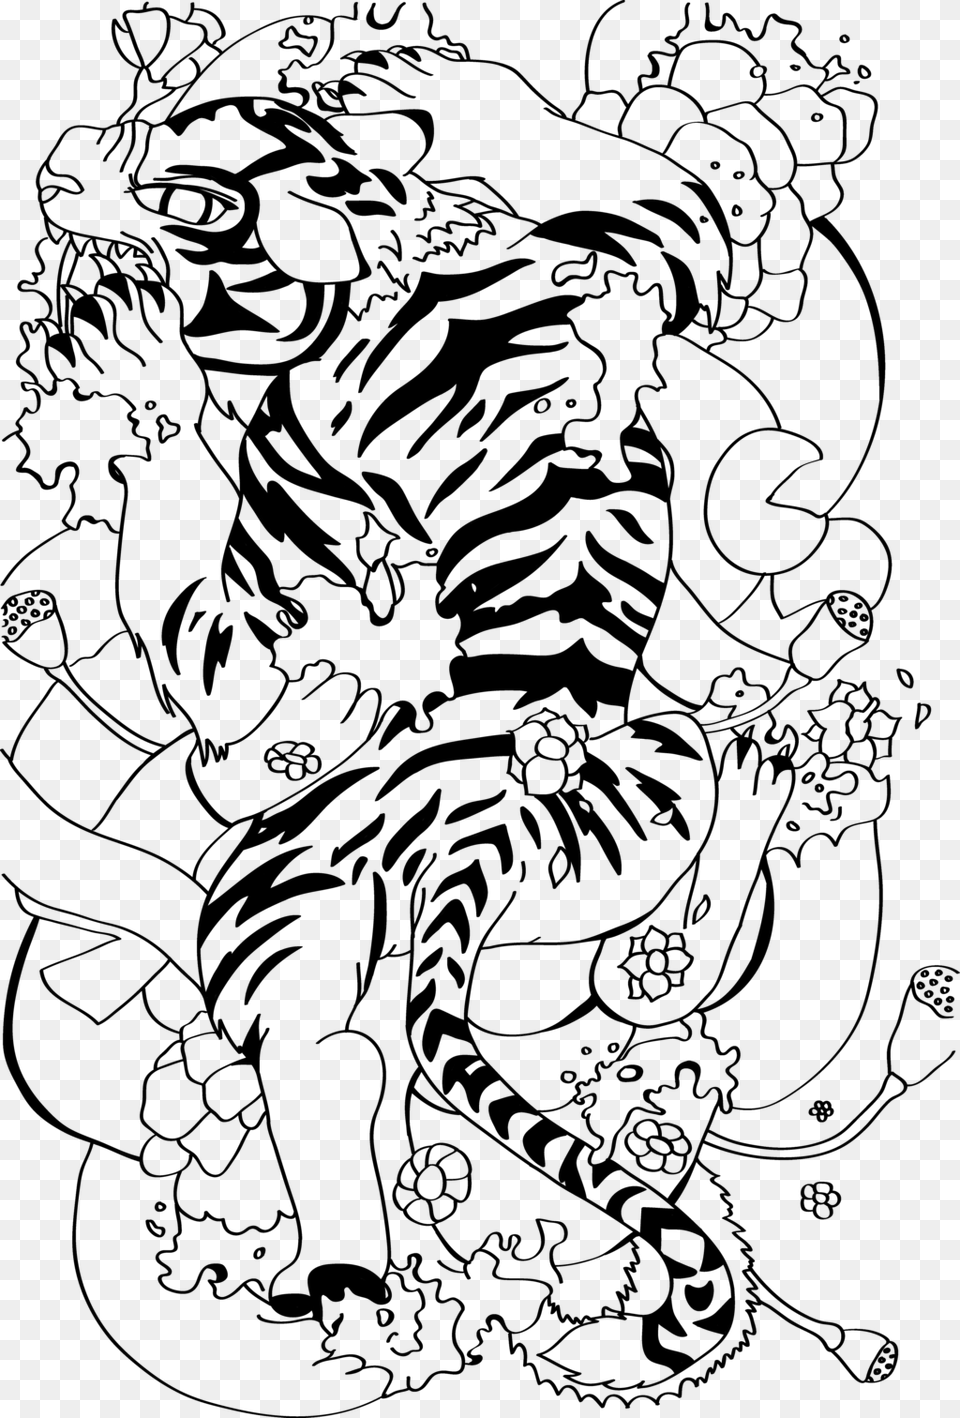 Tiger Tattoo Design For Men Transparents Tattoo Black And White, Art, Person, Drawing Png Image